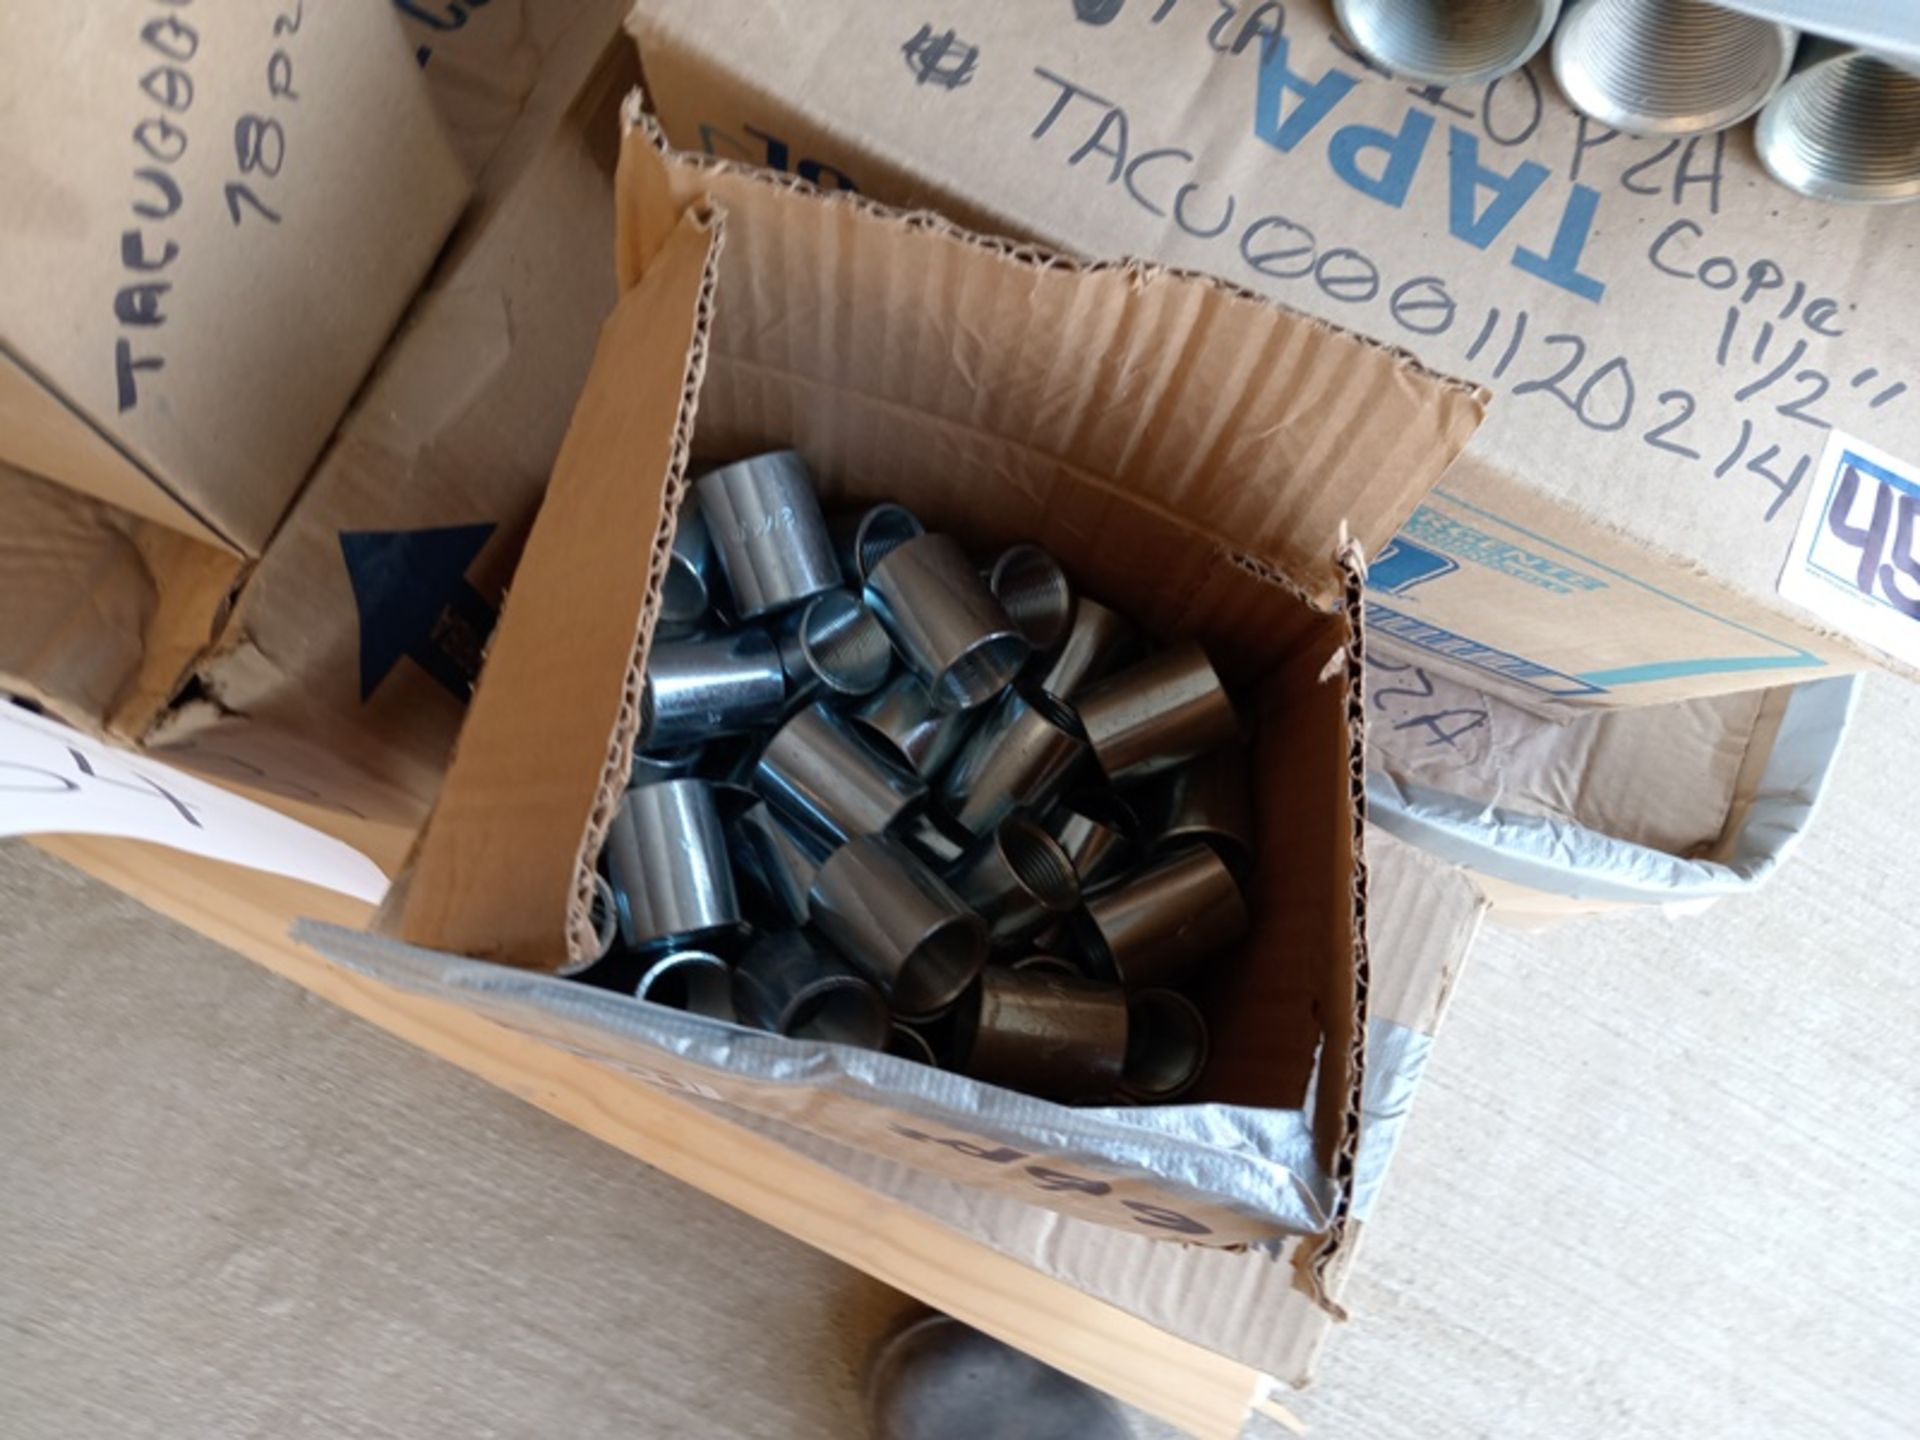 LOT OF (1,684) PIECES OF GALVANIZED STEEL UNION COUPLINGS - Image 3 of 7